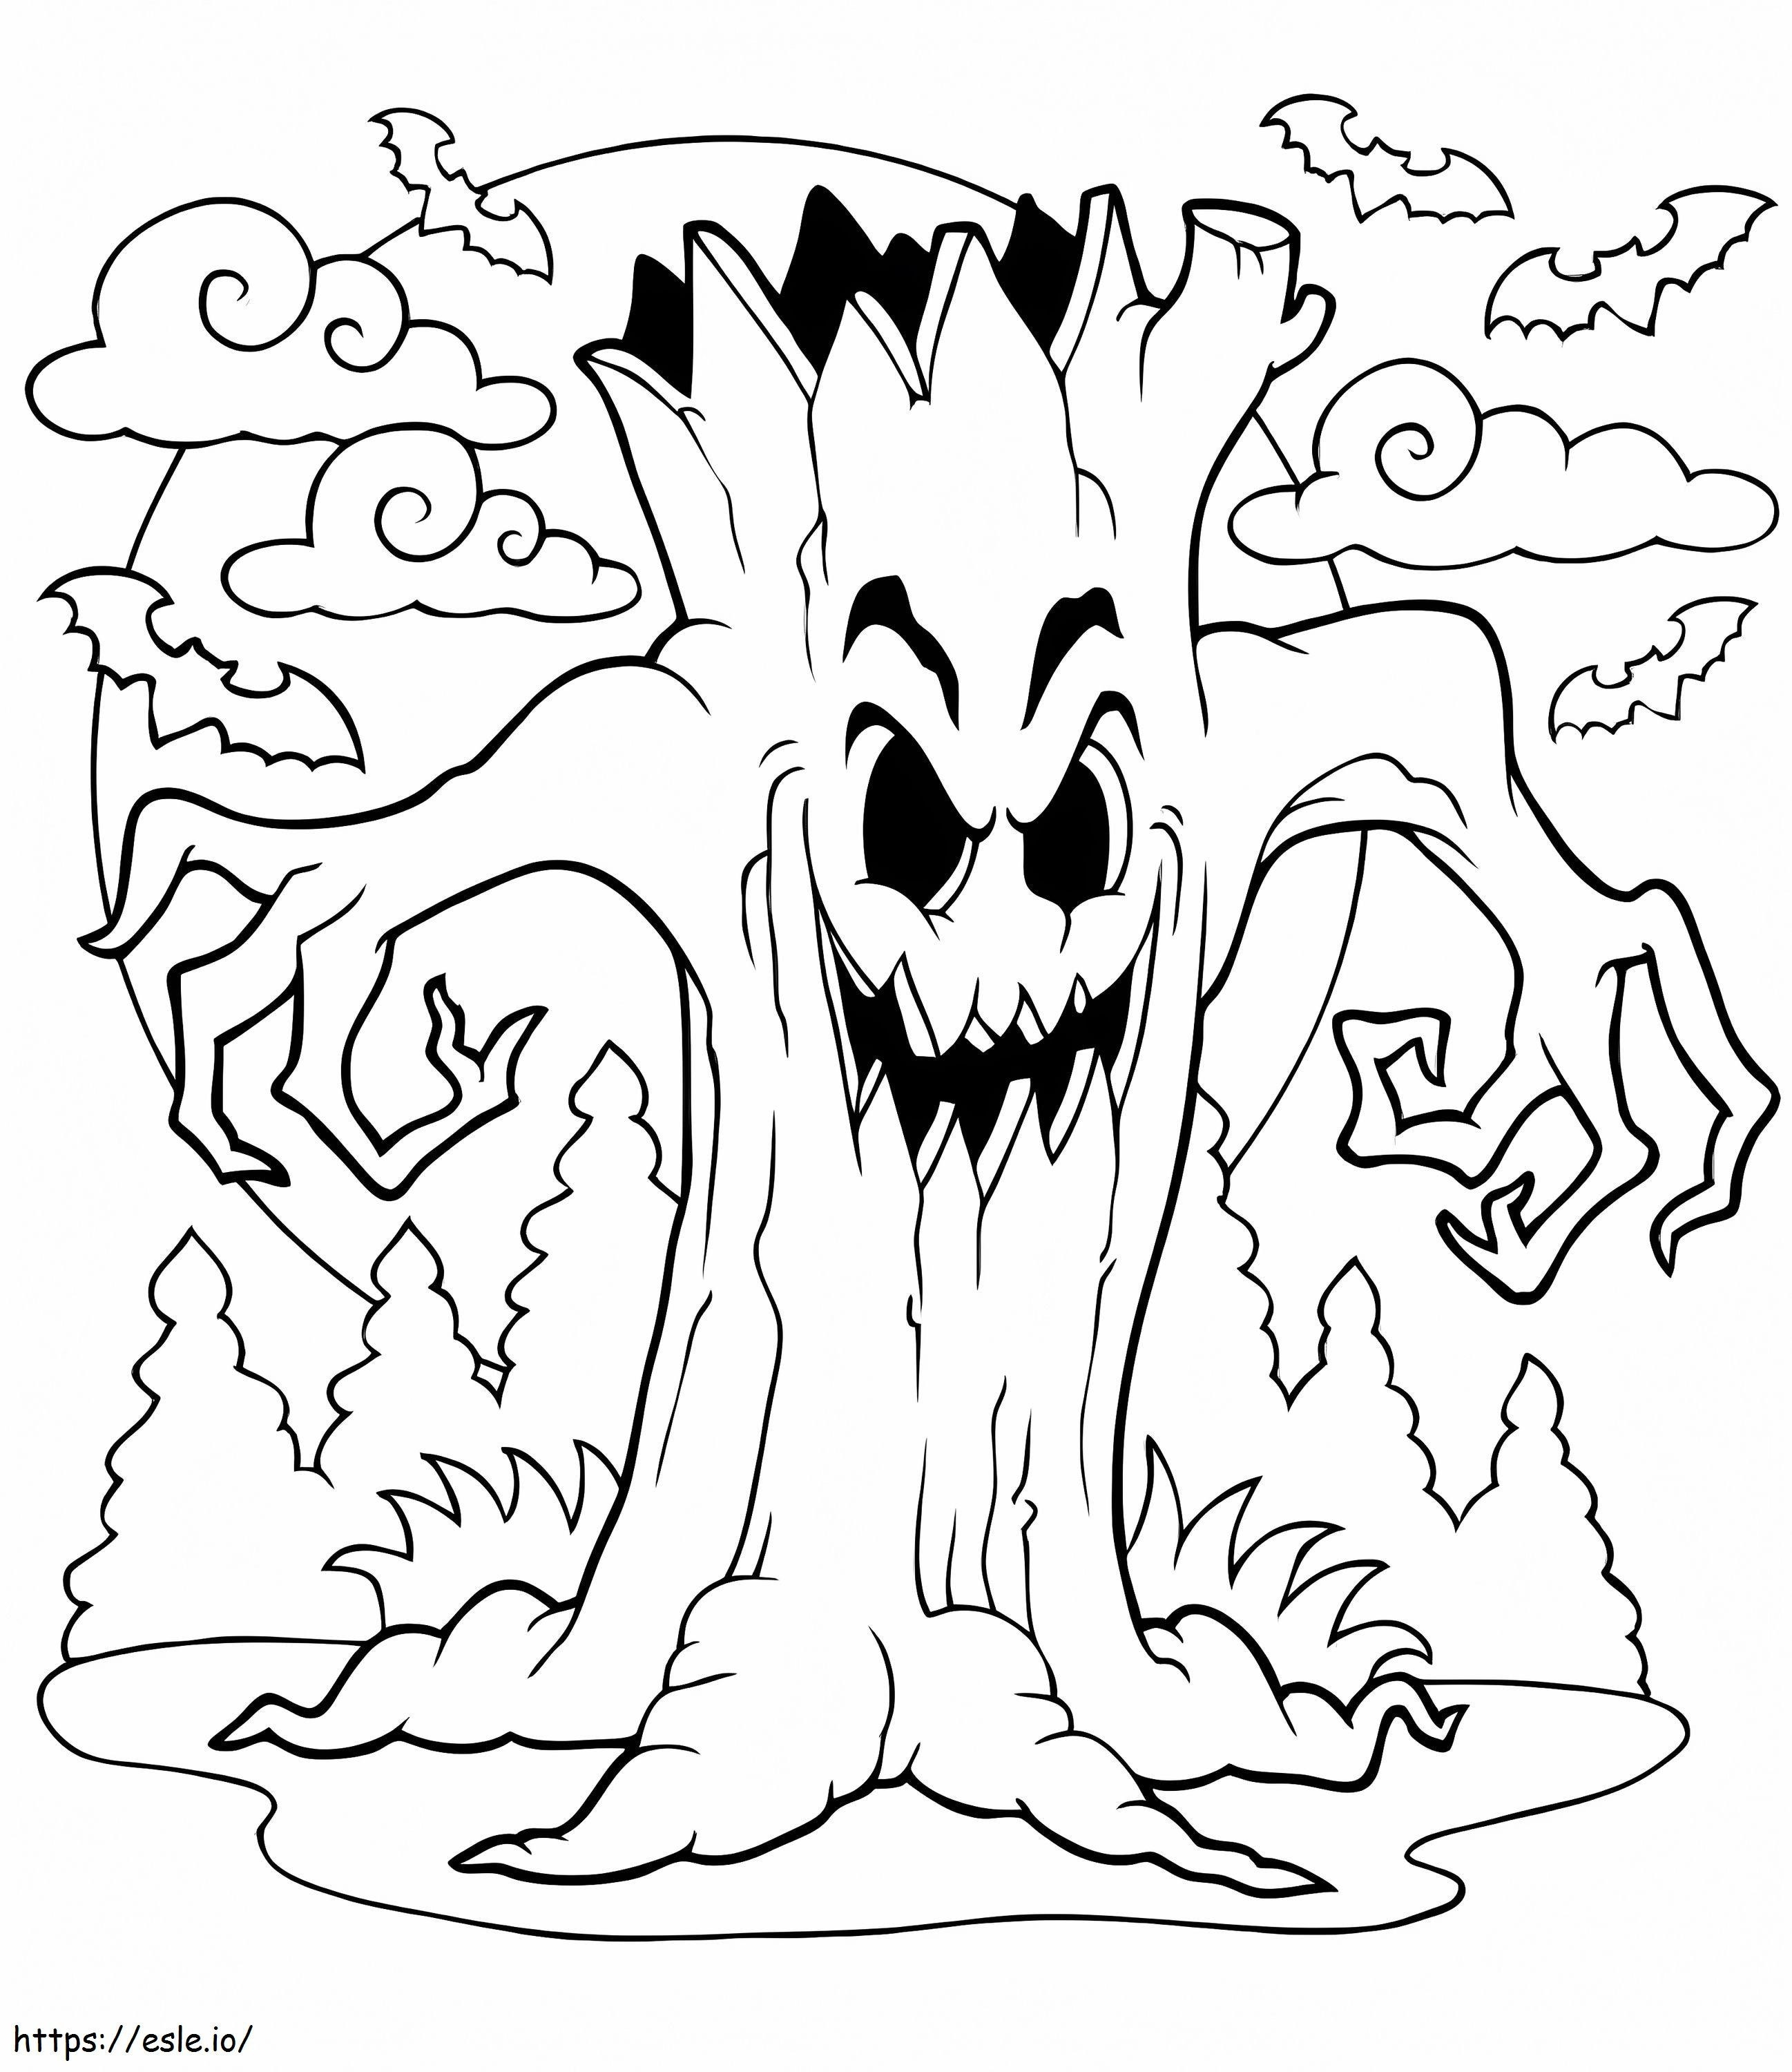 Spooky Tree On Halloween coloring page